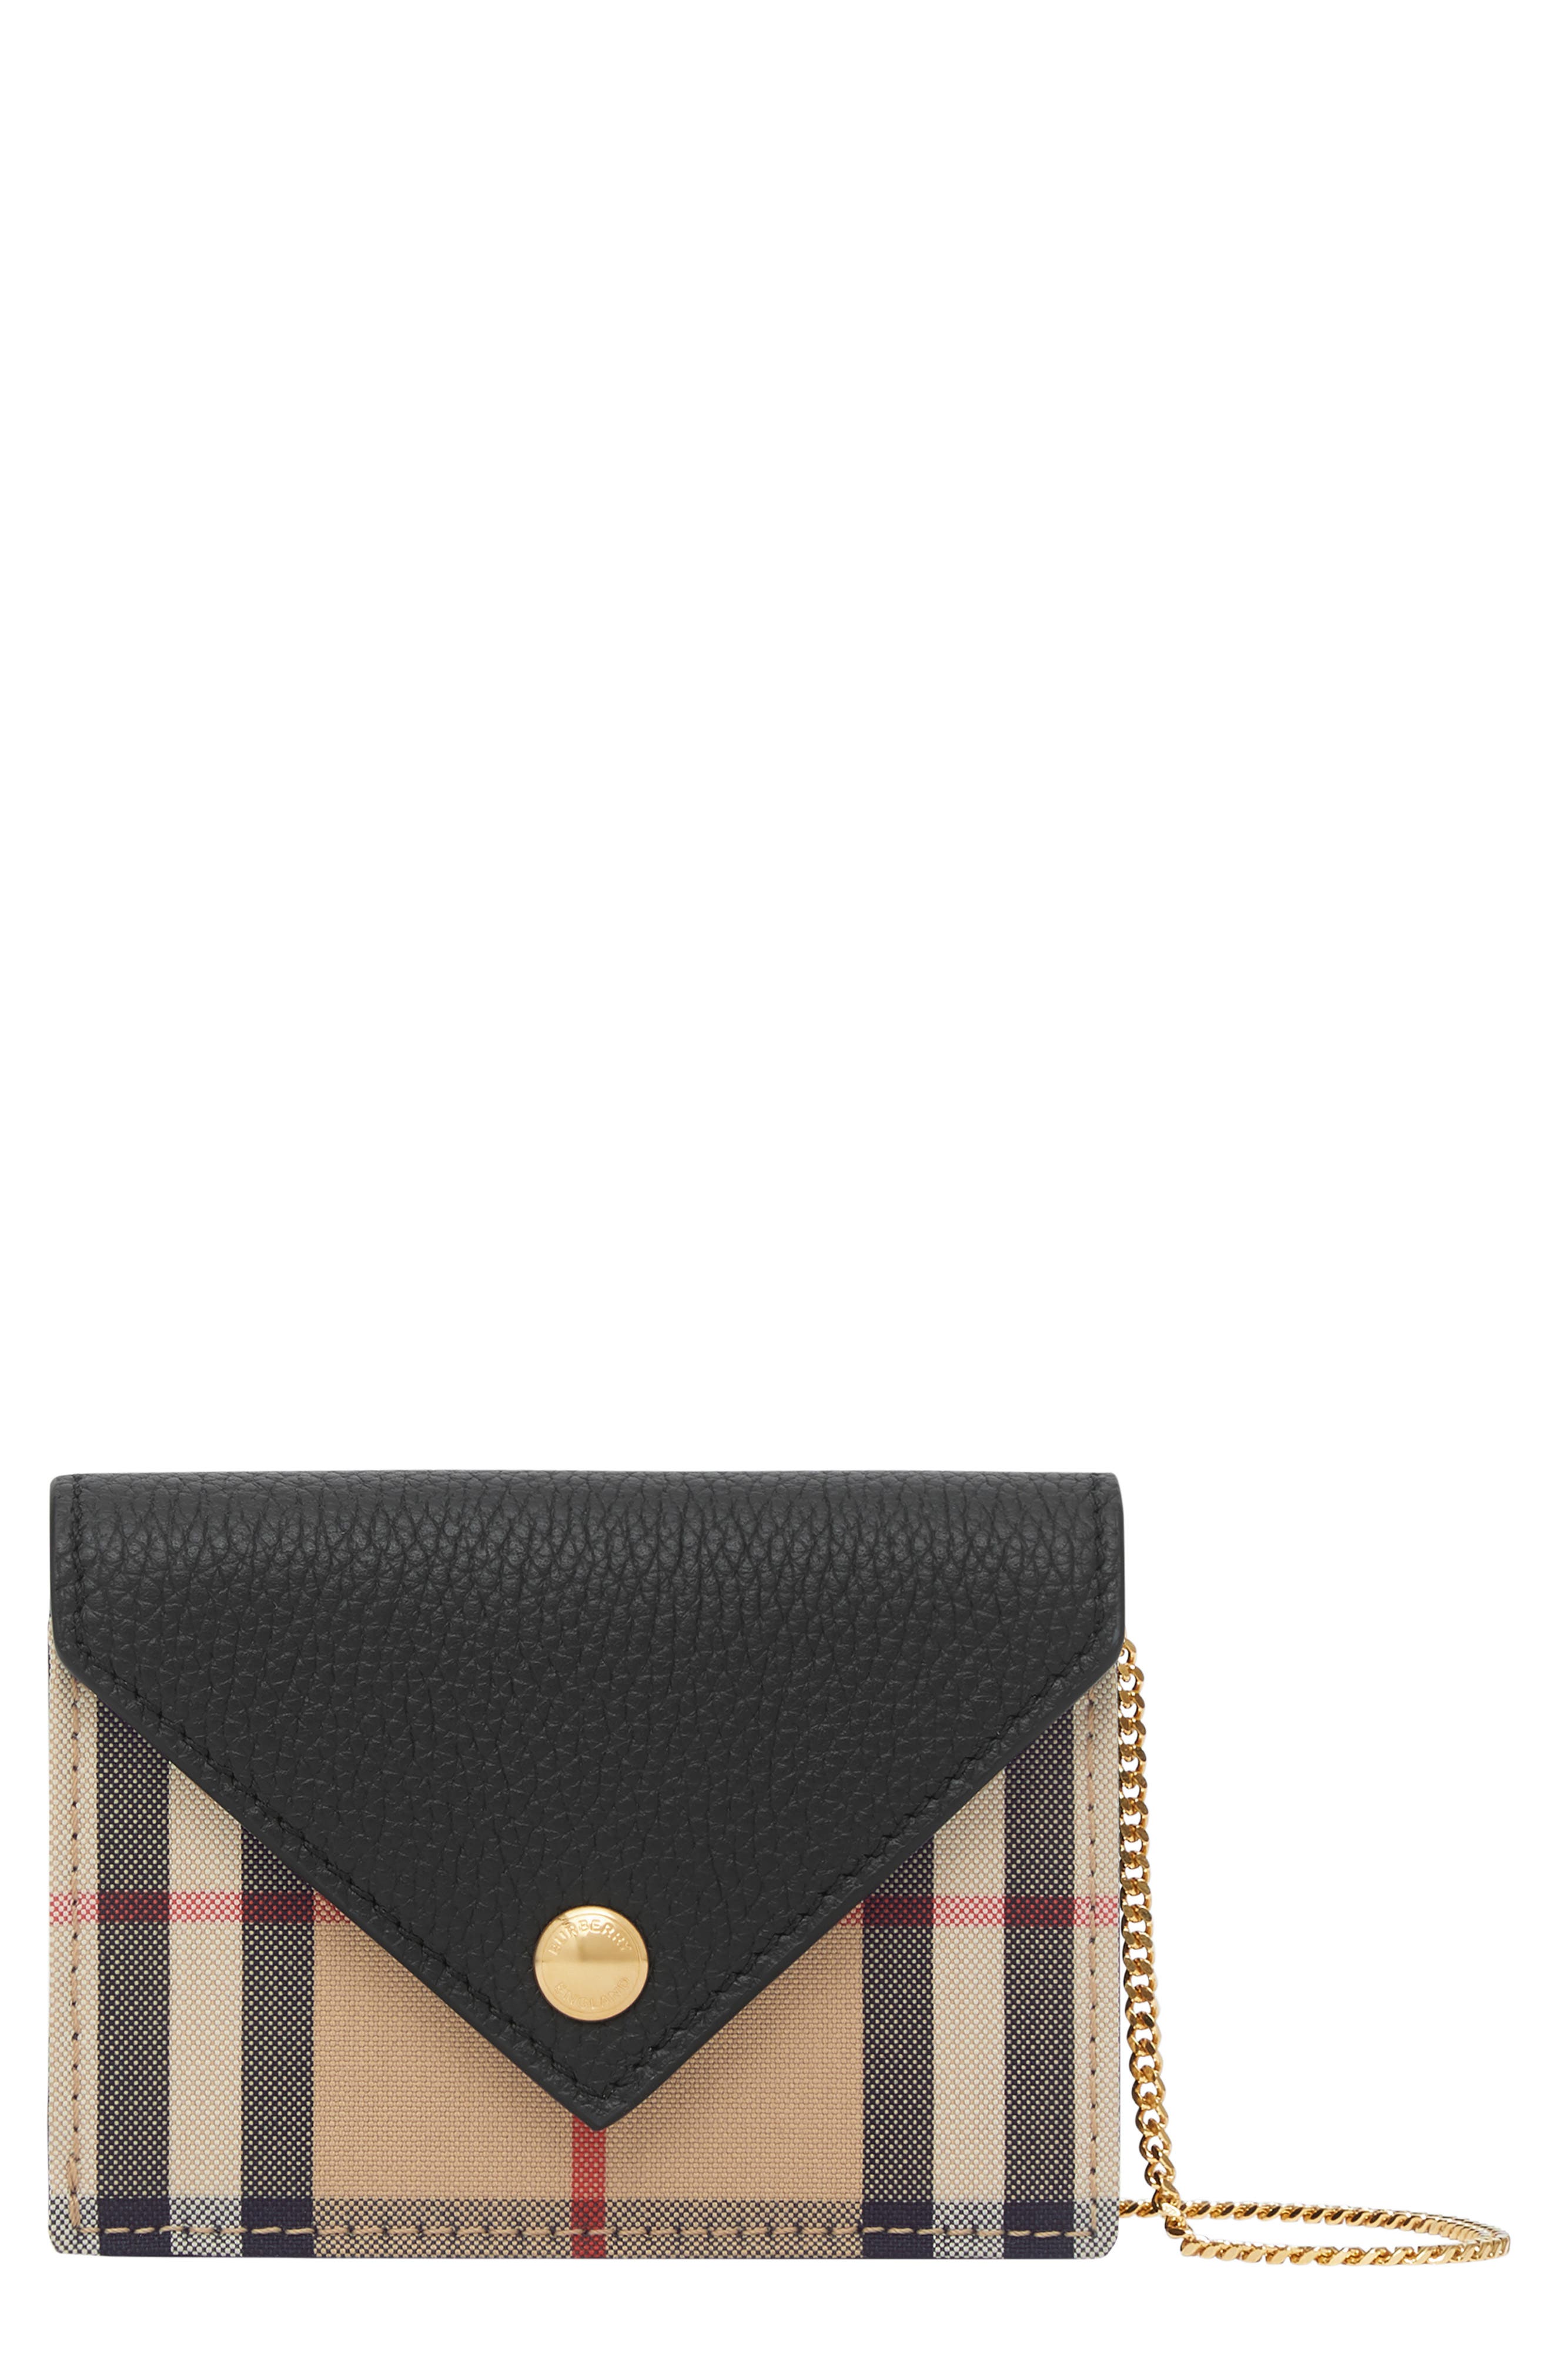 Burberry New Arrivals Accessories 